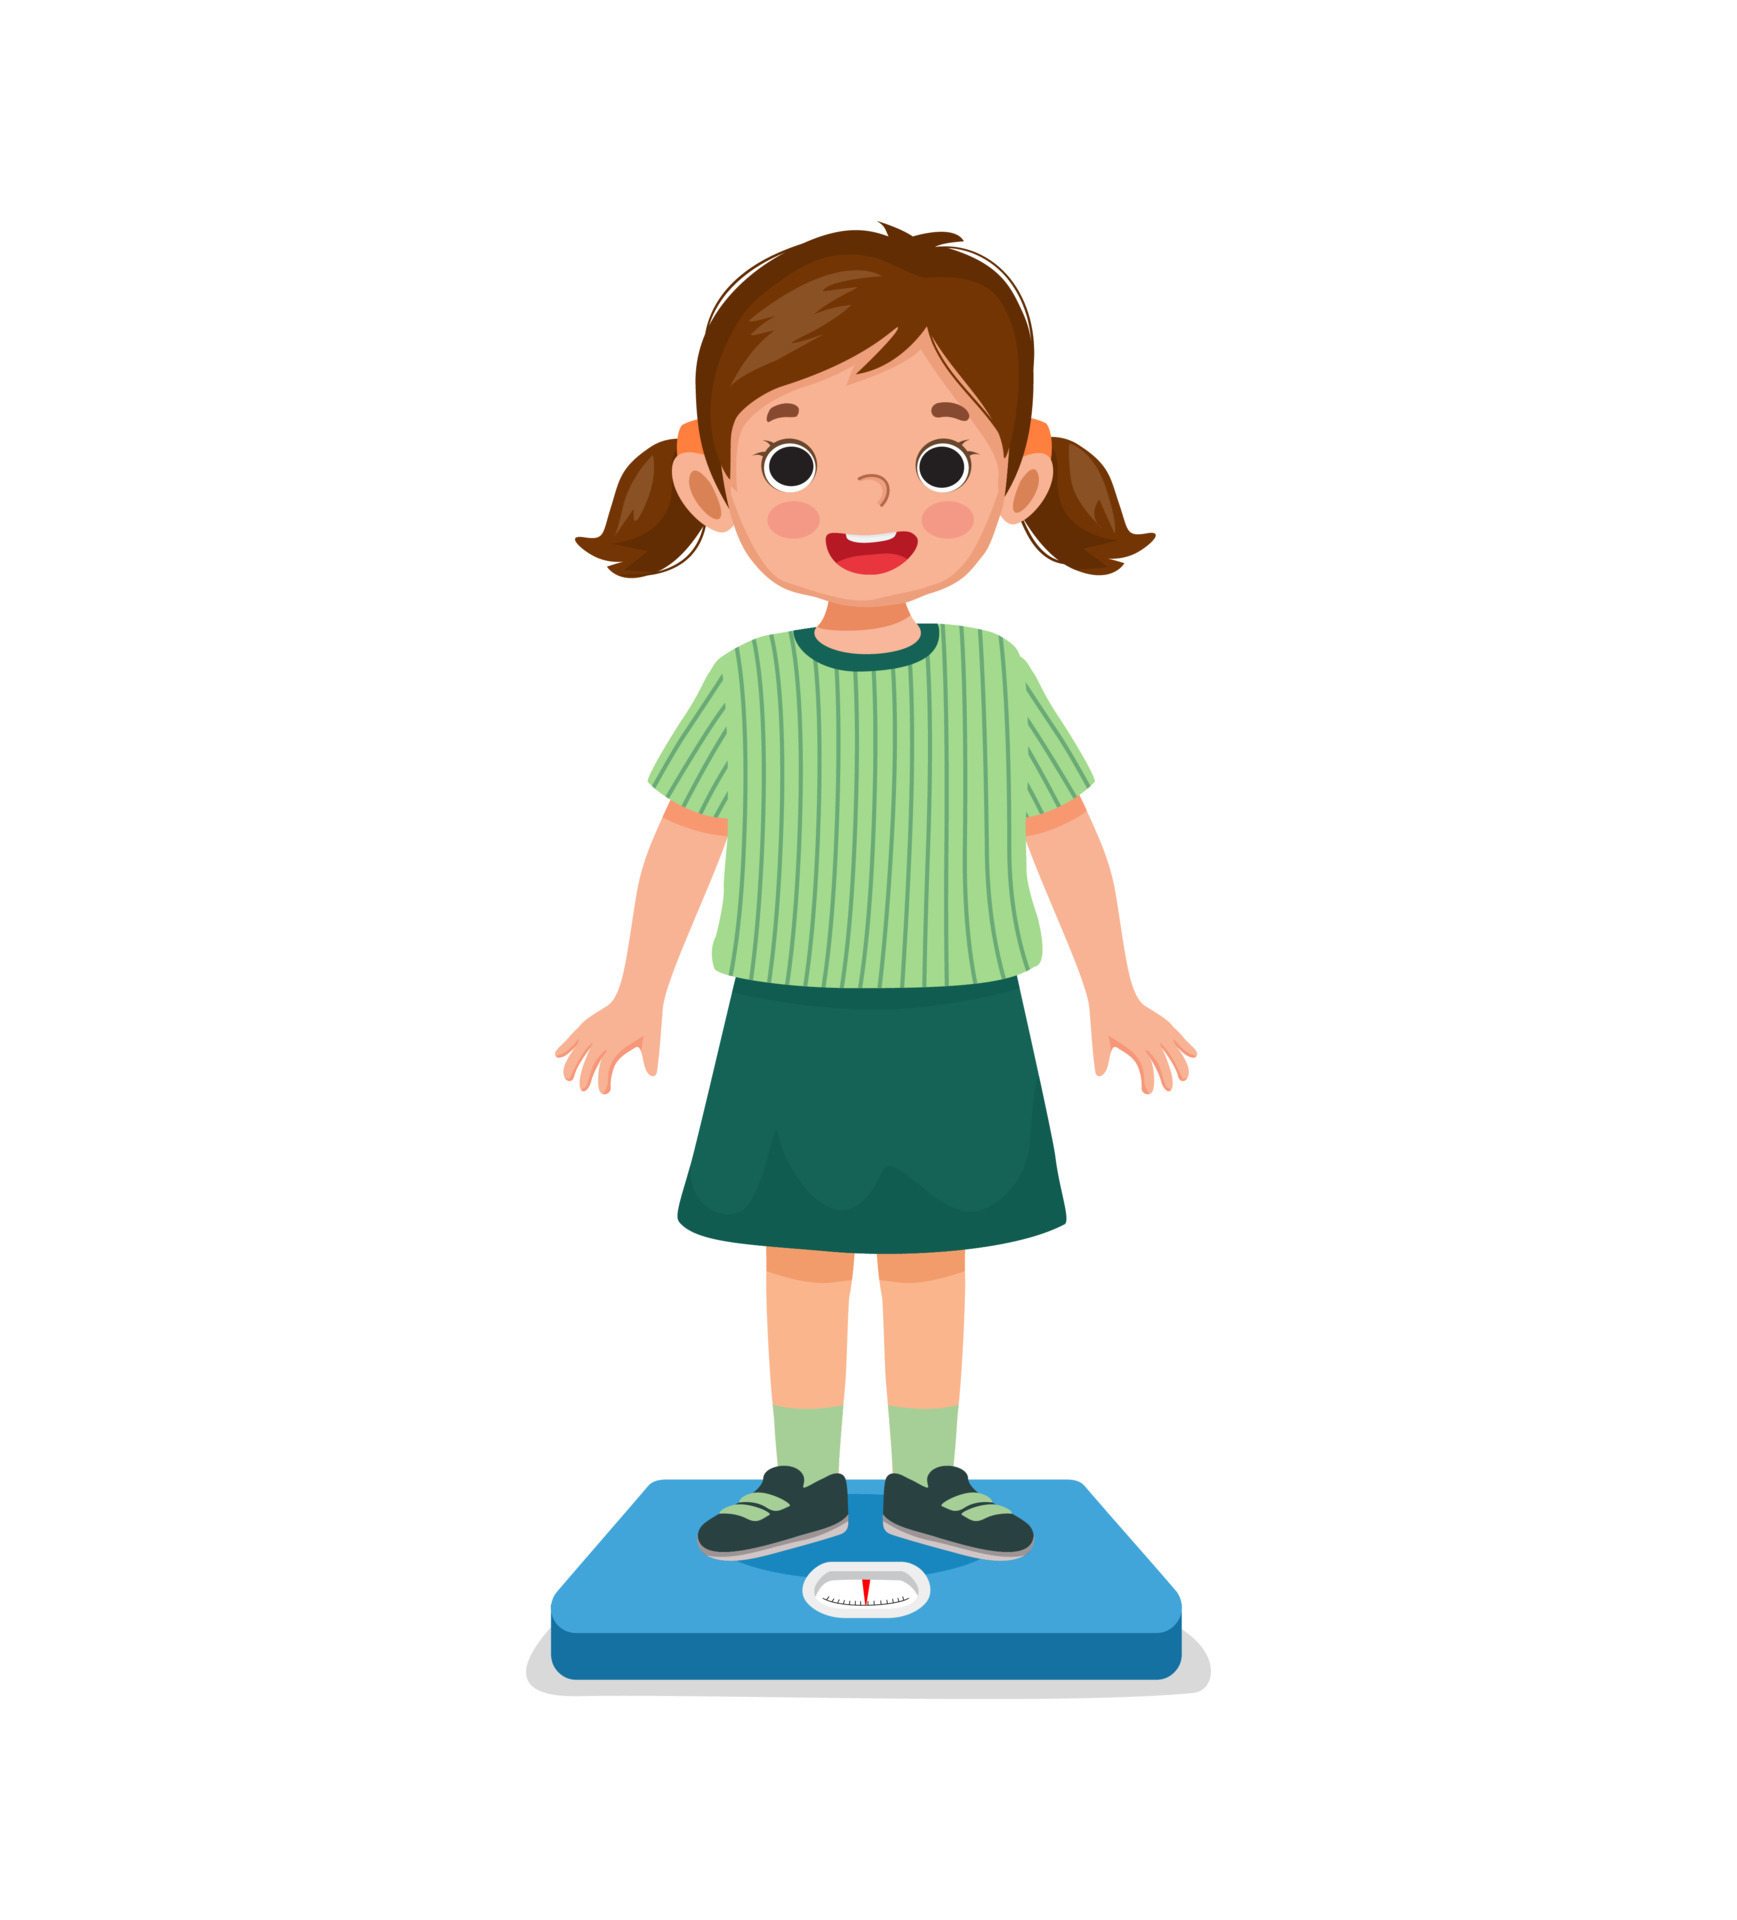 https://static.vecteezy.com/system/resources/previews/008/950/703/original/happy-little-girl-child-standing-on-the-weighing-scale-checking-her-weight-vector.jpg